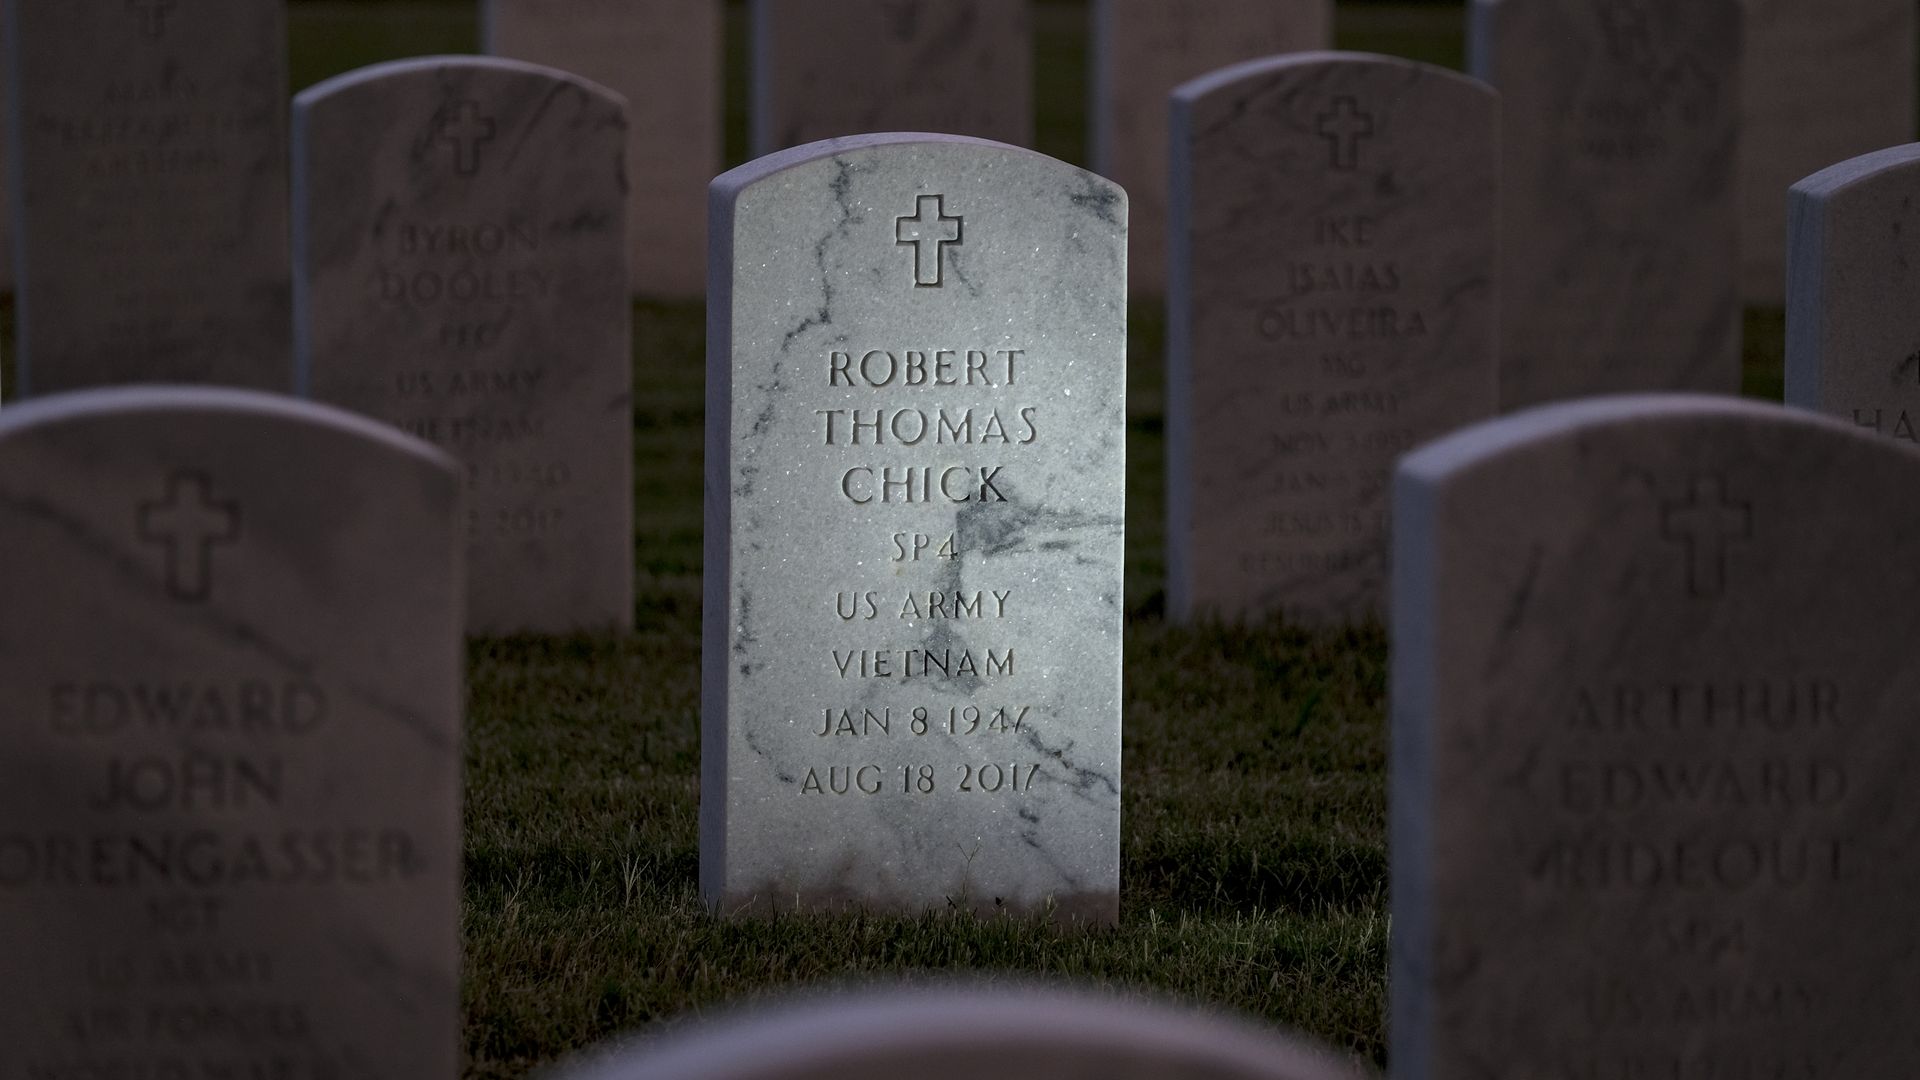 A headstone for a man named Robert Chick.